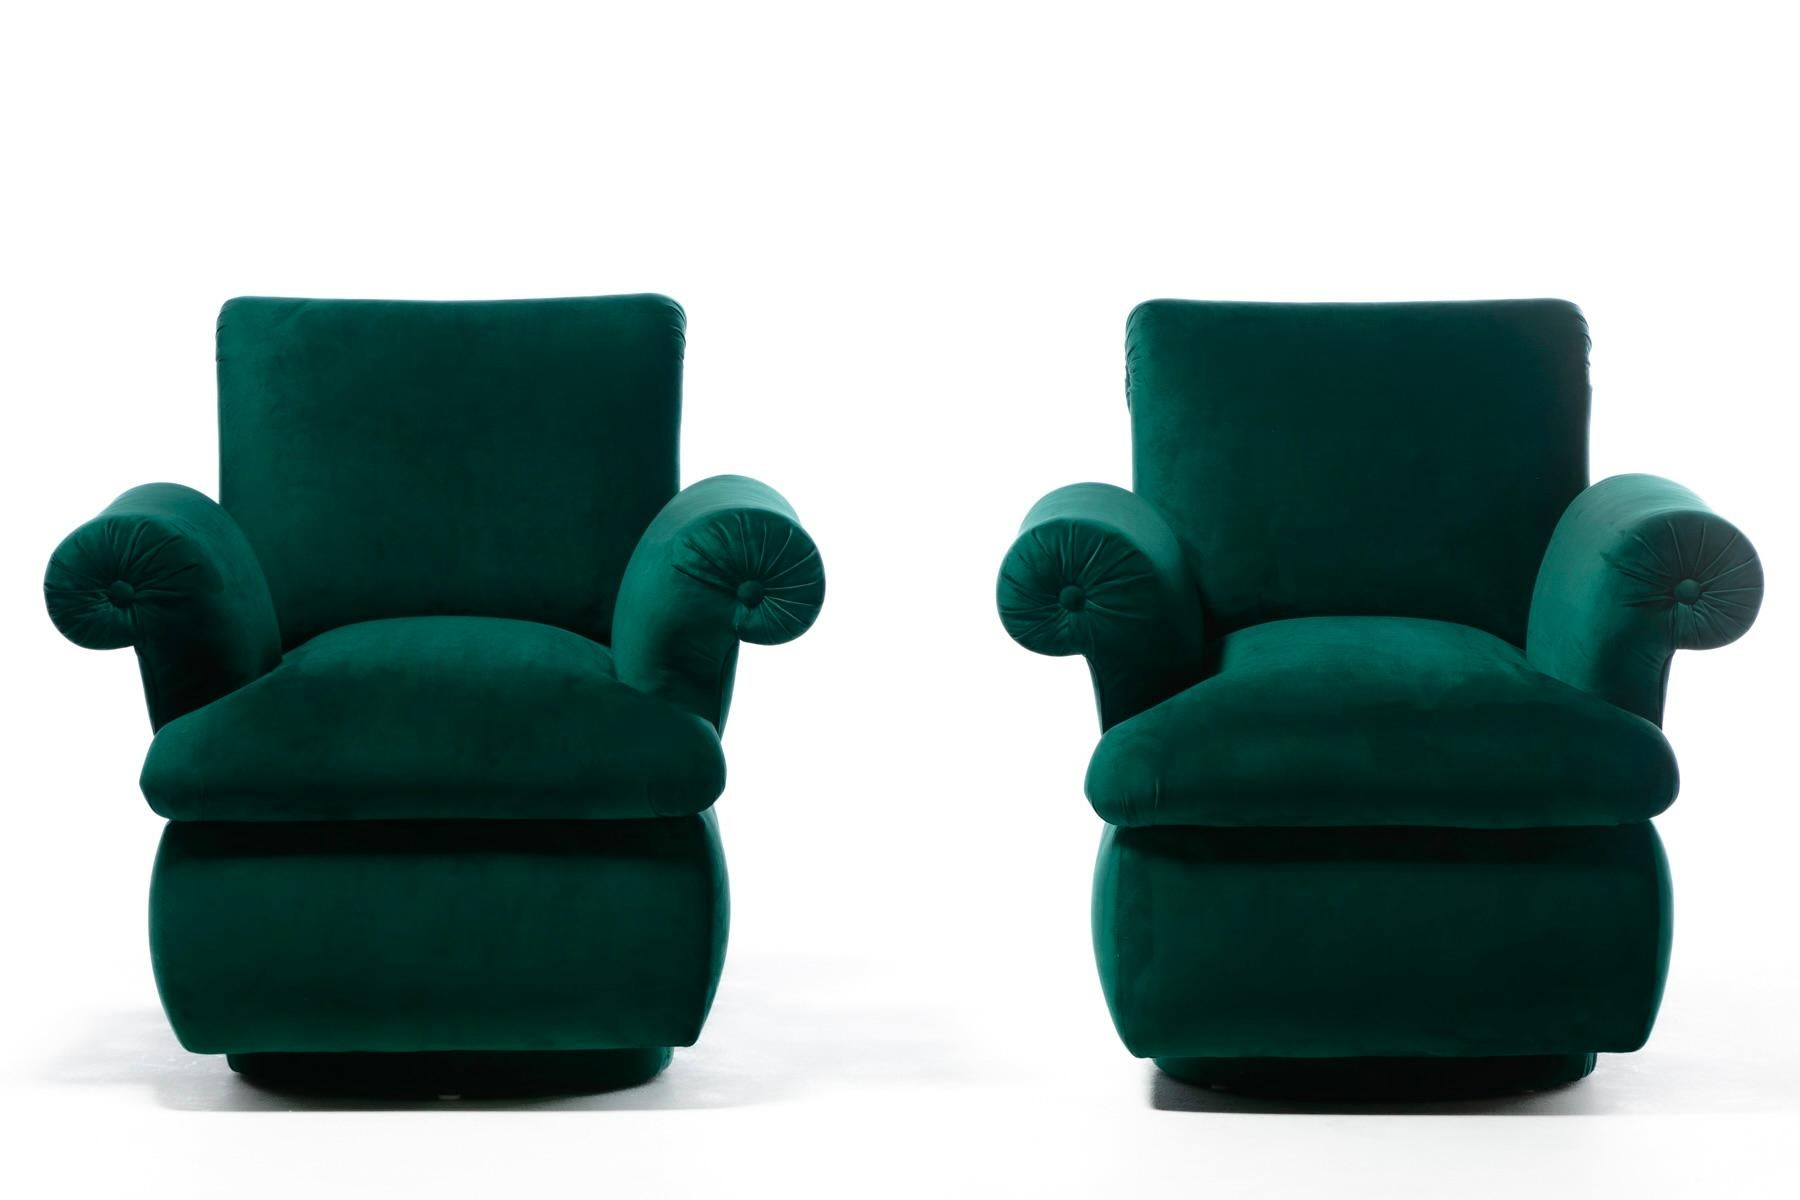 Dorothy Draper Style Hollywood Regency Swivel Arm Chairs in Emerald Velvet In Good Condition For Sale In Saint Louis, MO